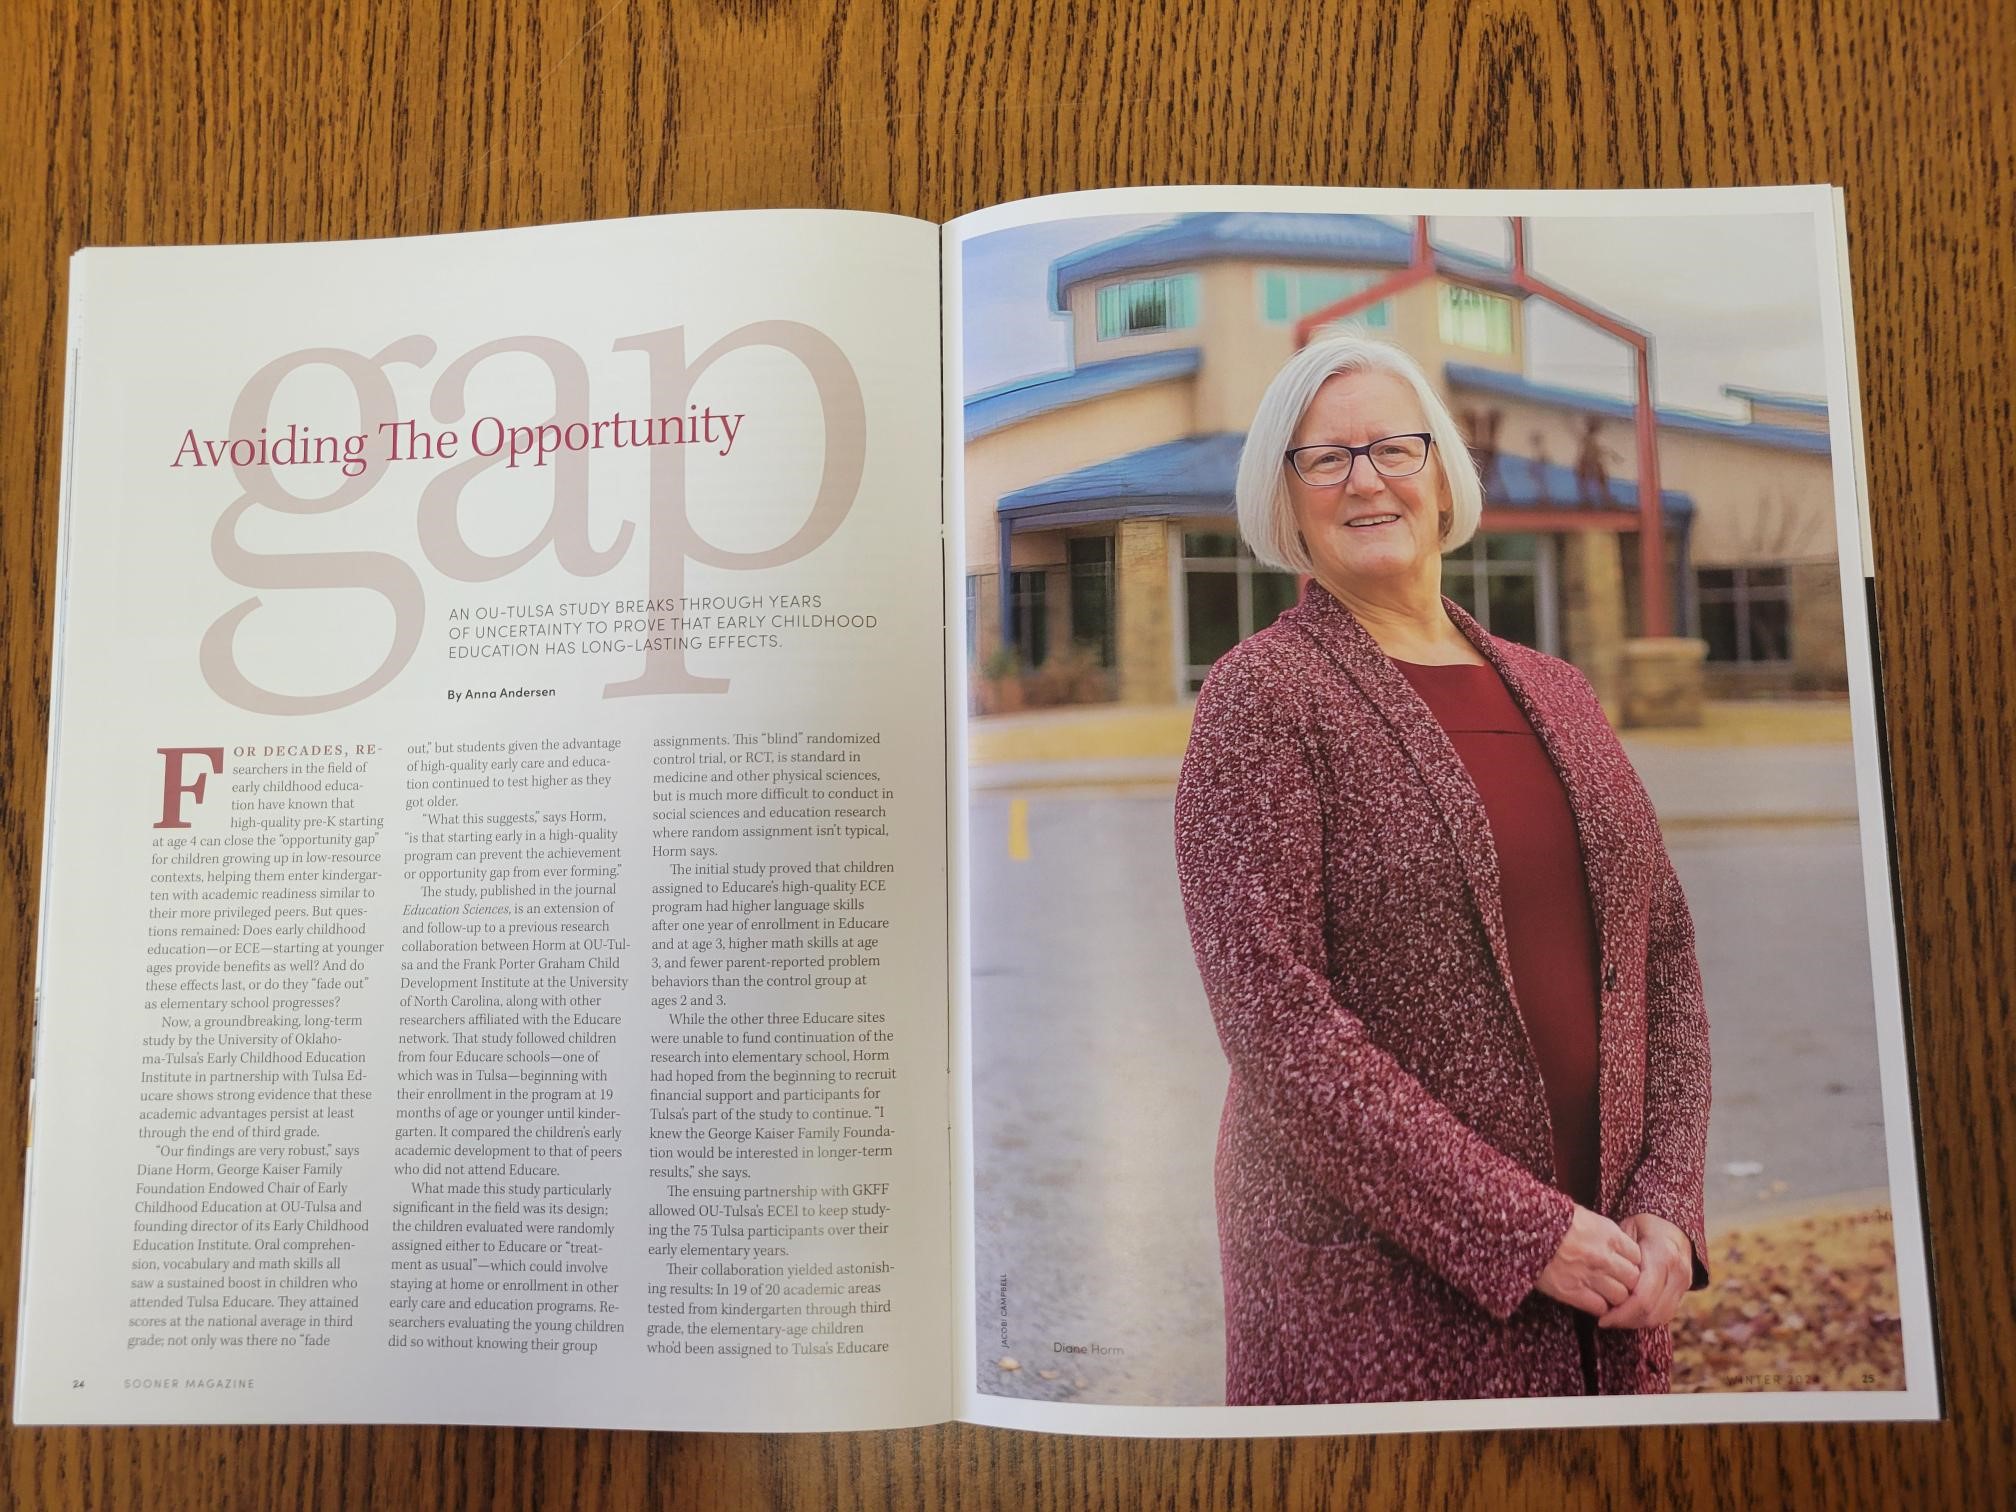 Sooner Magazine spread showing Avoiding the Opportunity Gap article and photo of Diane Horm